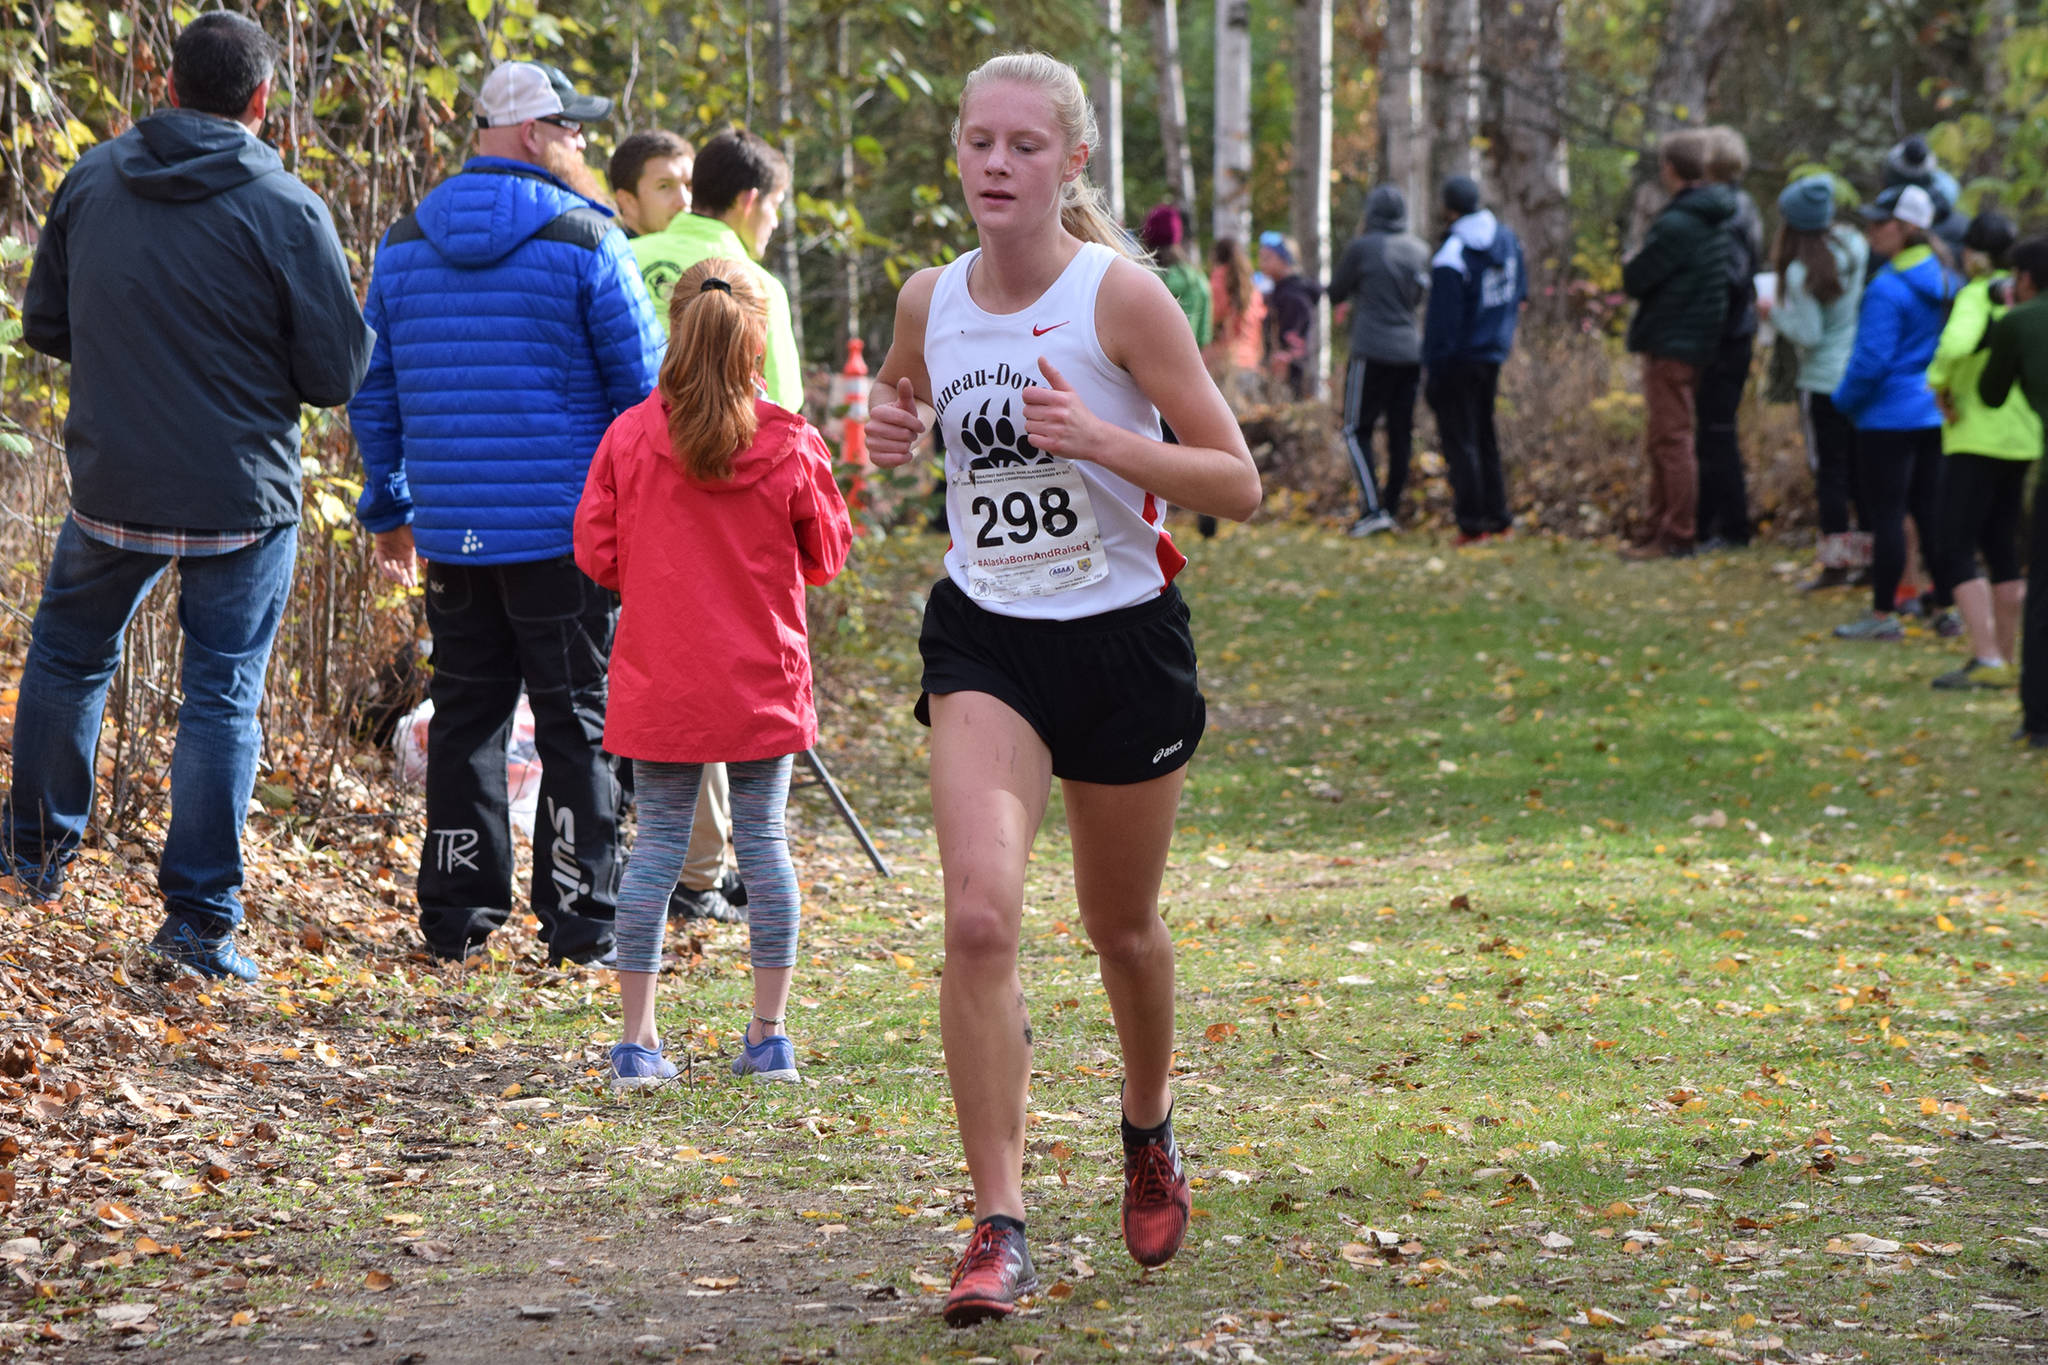 Juneau-Douglas High School: Yadaat.at Kalé senior Sadie Tuckwood races in second place in the ASAA Division I girls cross country championships at Bartlett High School on Saturday, Oct. 5, 2019. Tuckwood took second overall with a time of 18:13. (Nolin Ainsworth | Juneau Empire)